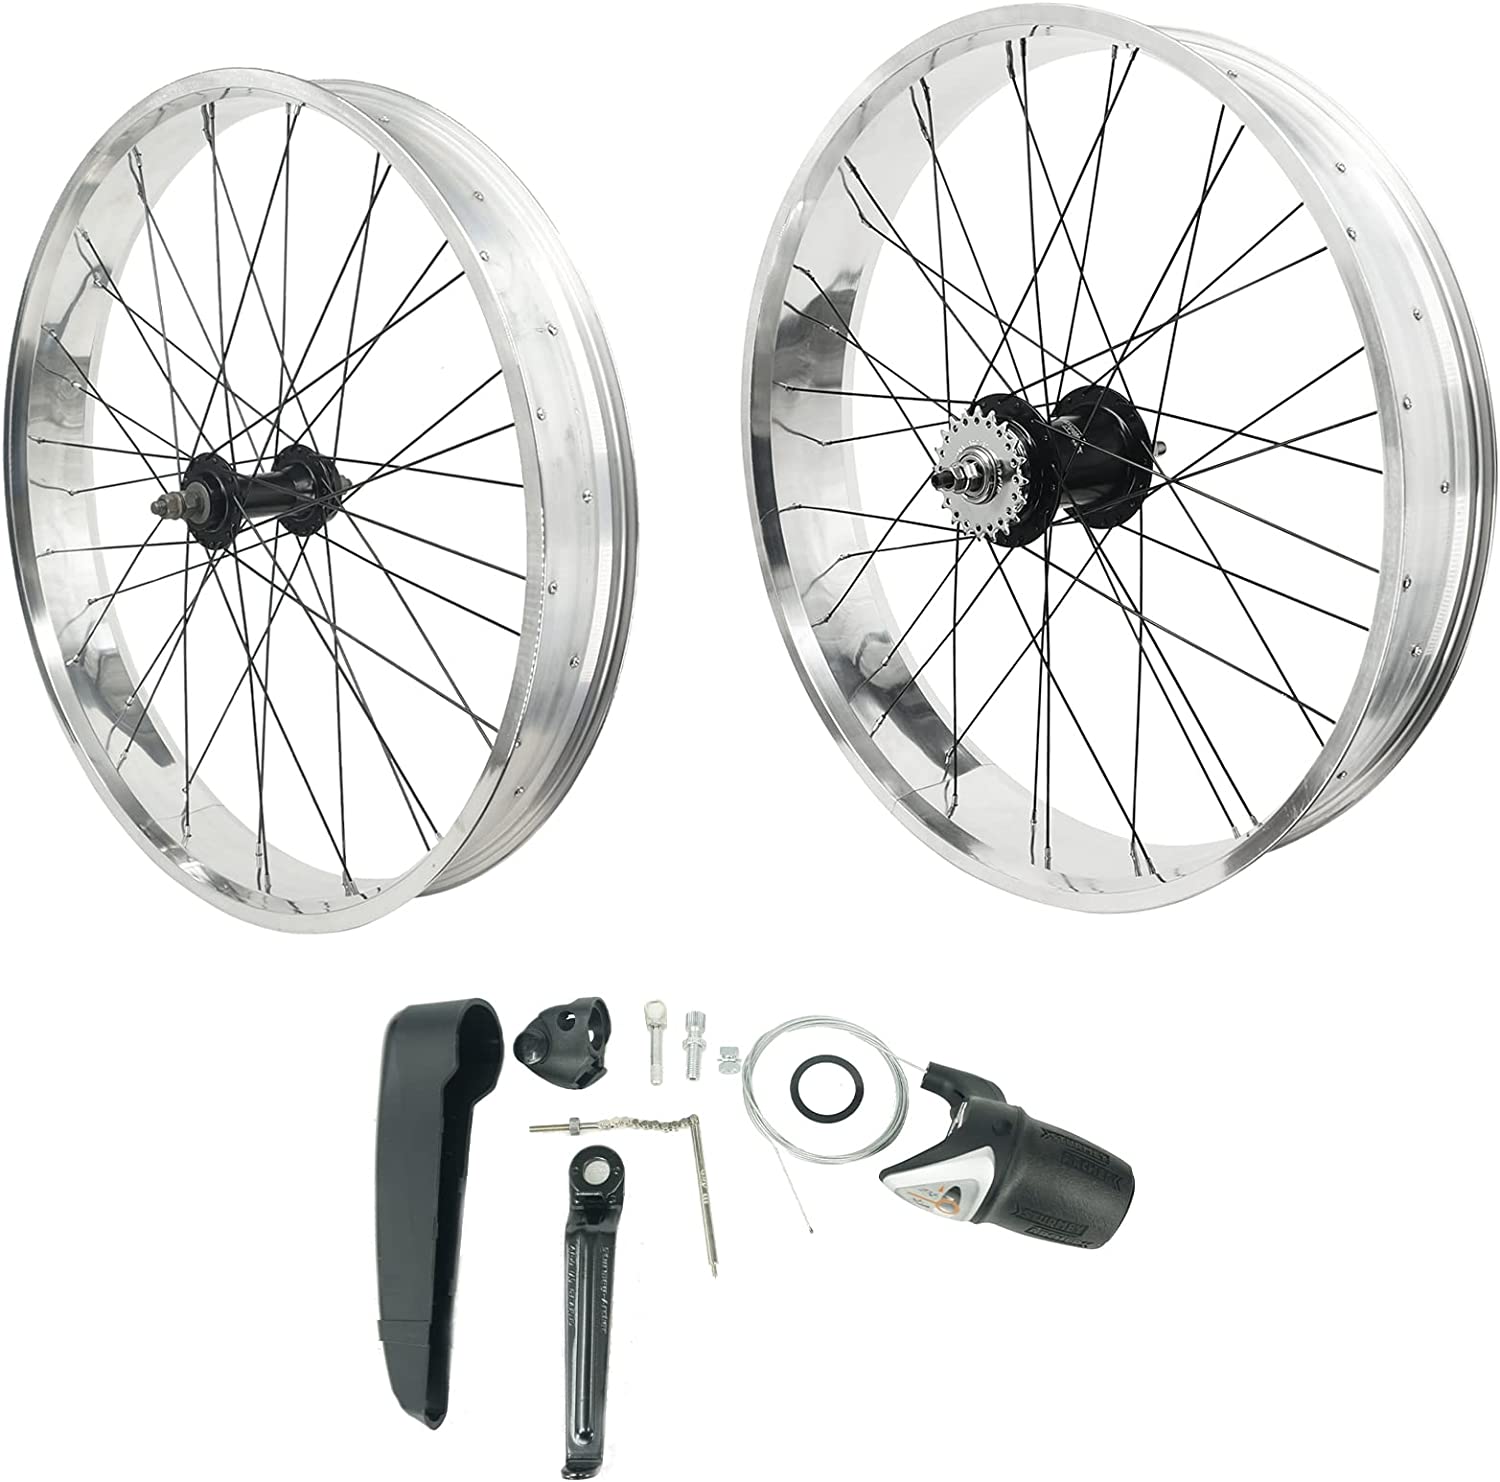 Tracer WH-2640RK3-PLS-B  Cruiser Bicycle Wheel Set 26" x4.0 with Sturmey Archer inter-3 Speed Aluminum Hubs/Polished